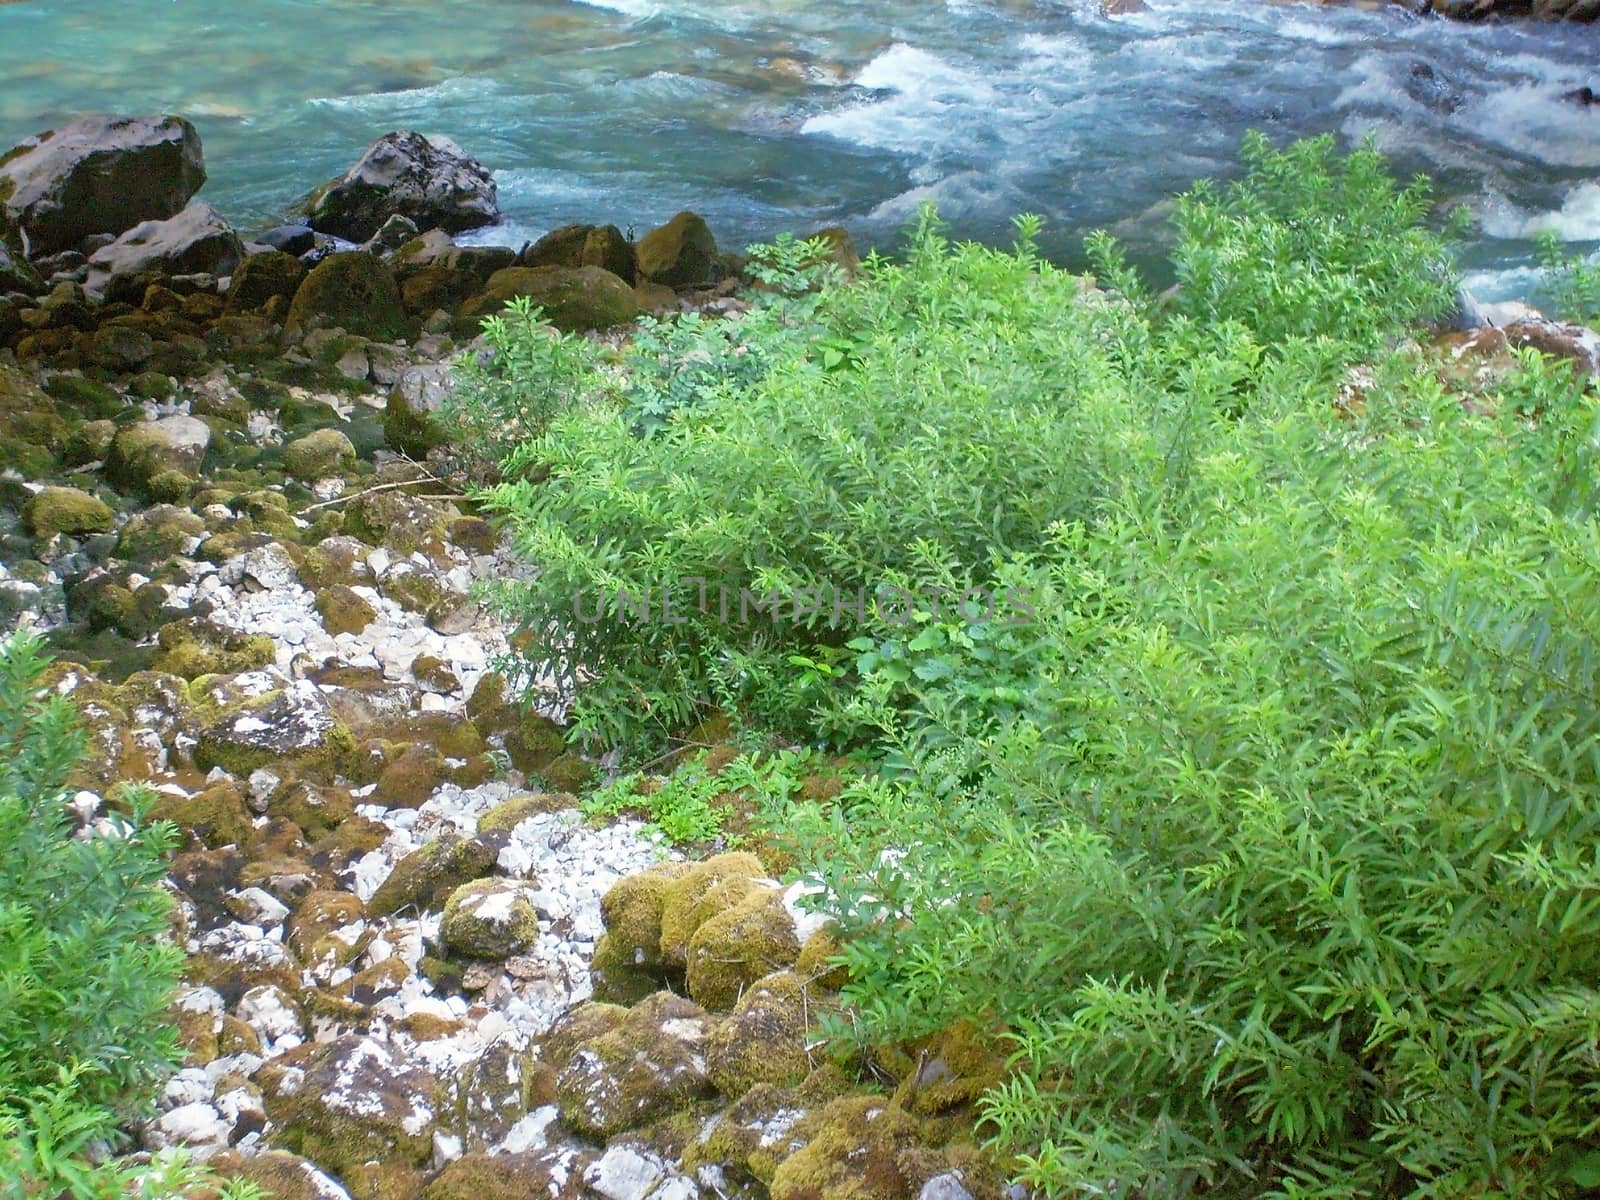 
The fast mountain river, the river bank with beautiful plants in the mountains of Abkhazia